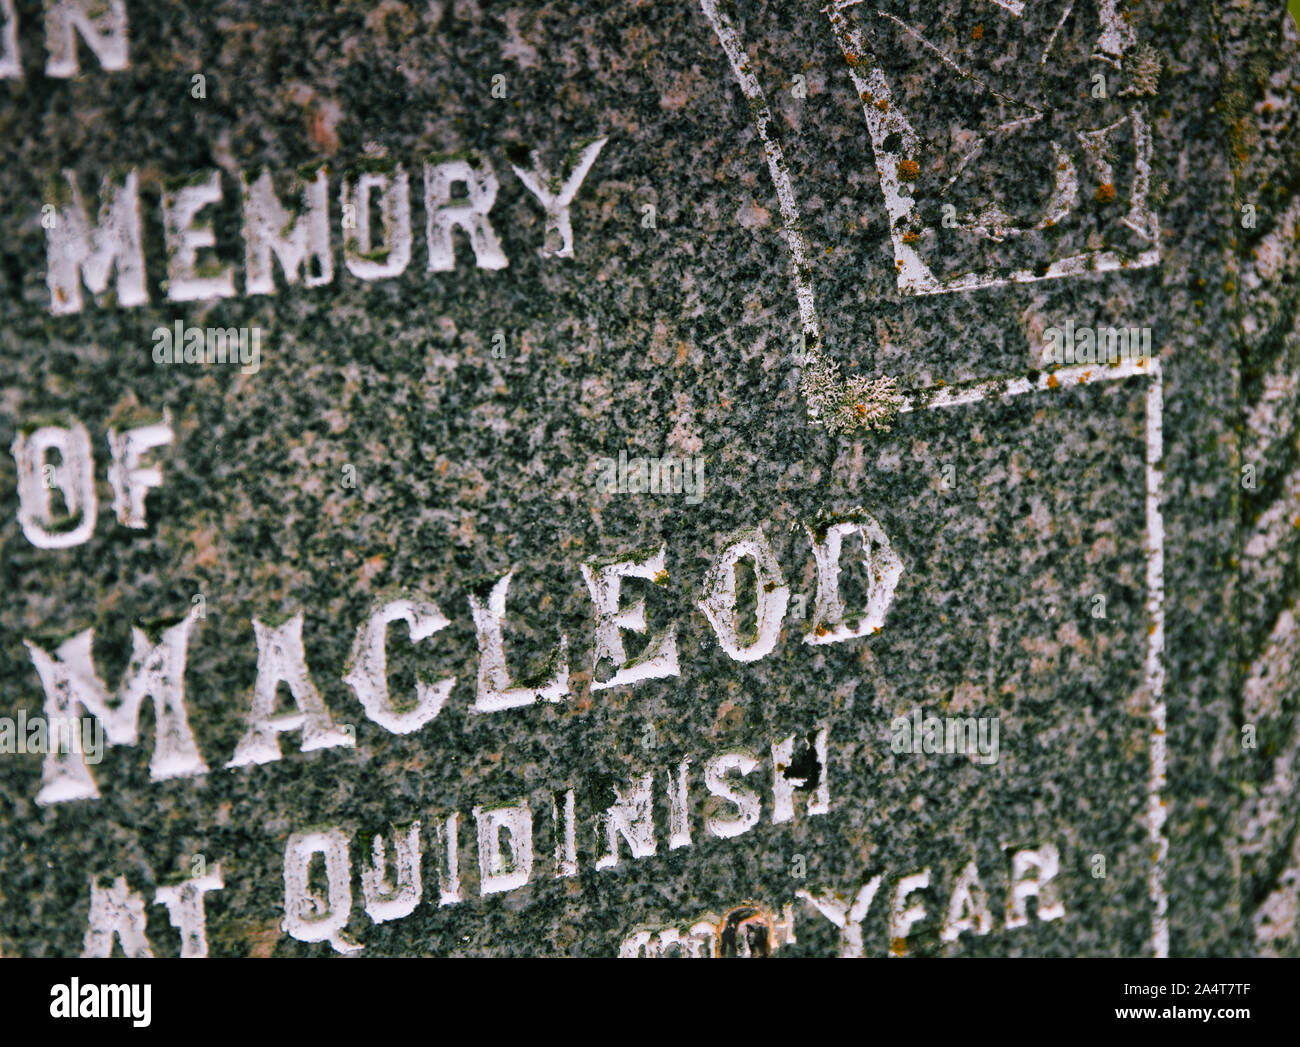 Gravestone of a Macleod from Quidinish buried in the graveyard of St Clement's Church at Rodel, Isle of Harris, Outer Hebrides, Scotland Stock Photo